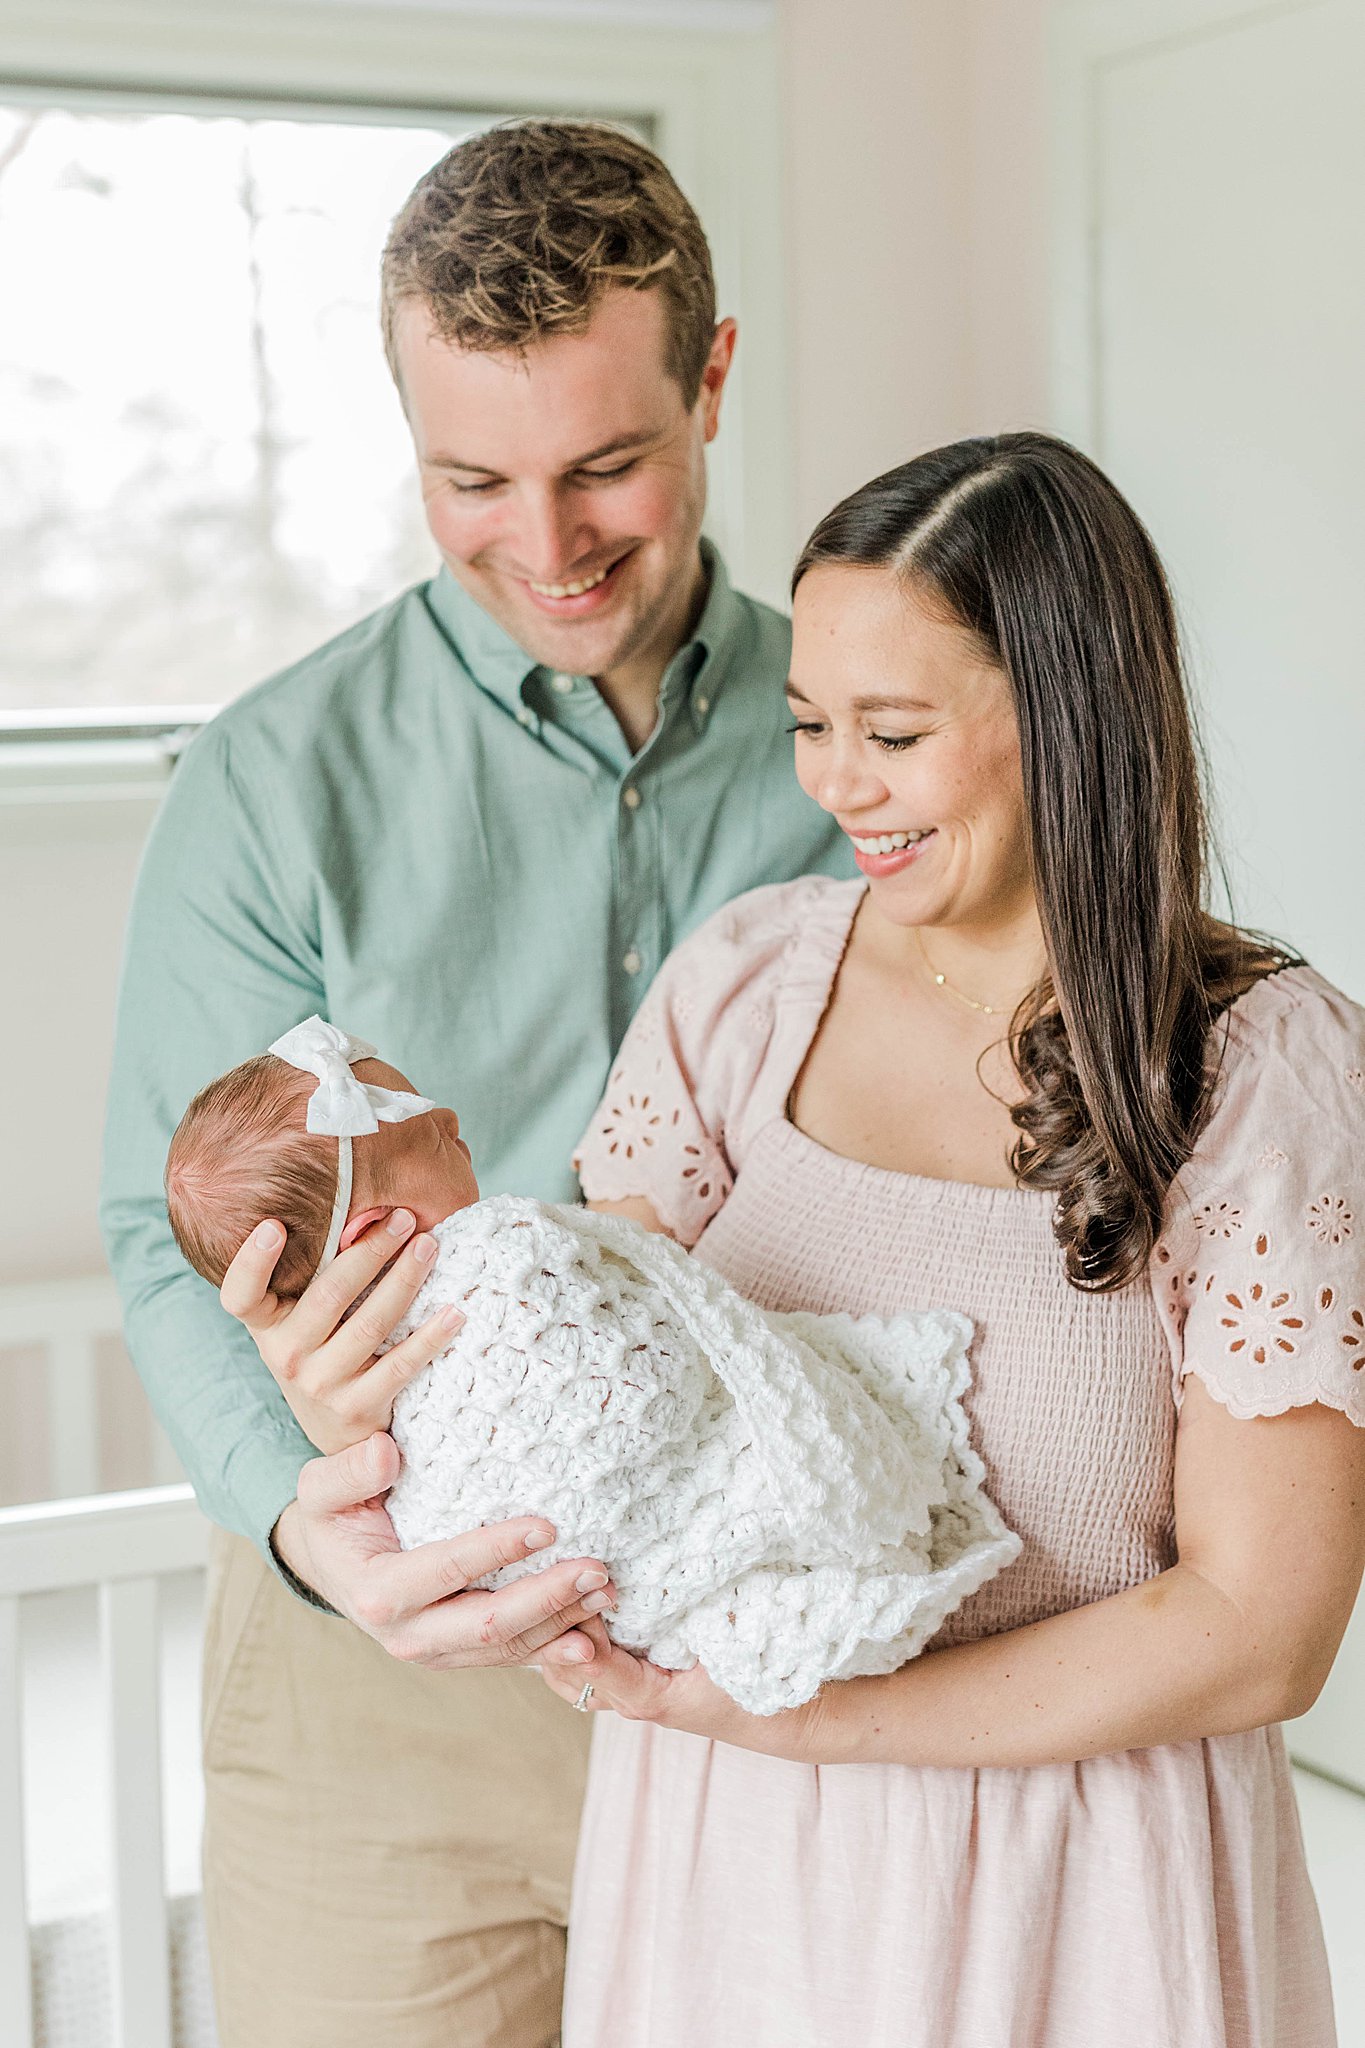 Dad and mom holding daughter at newborn photo session